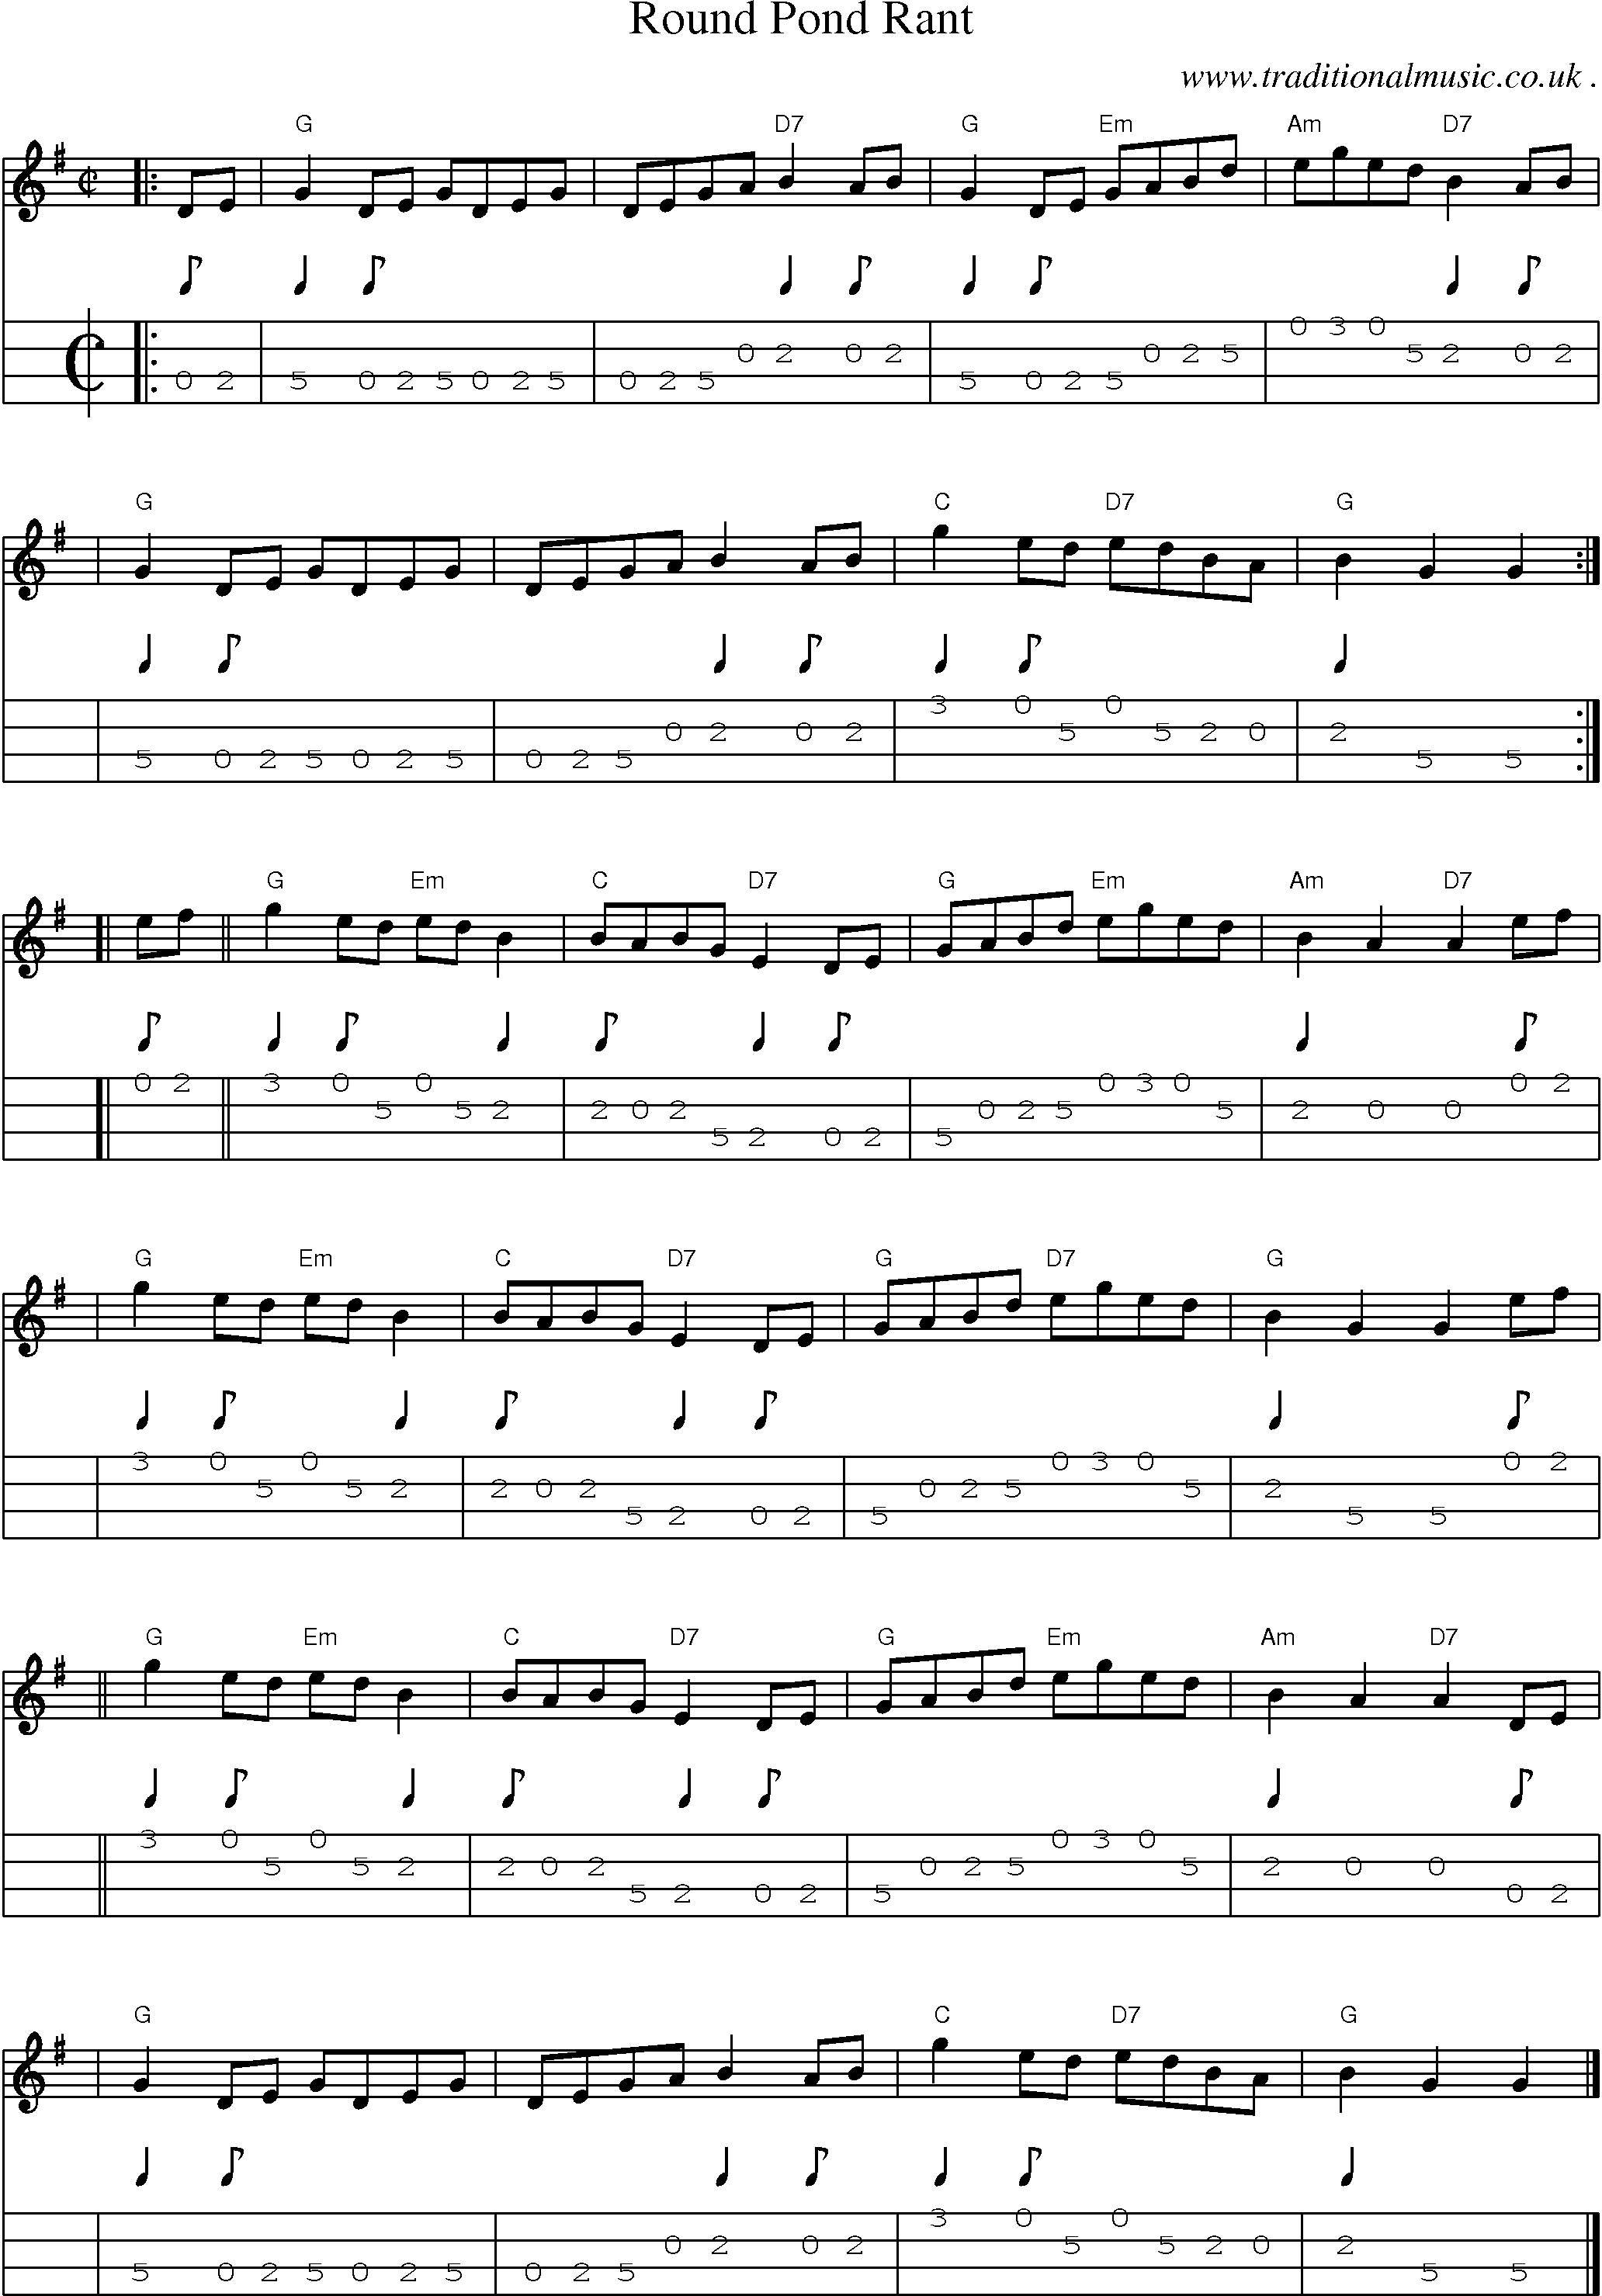 Sheet-music  score, Chords and Mandolin Tabs for Round Pond Rant